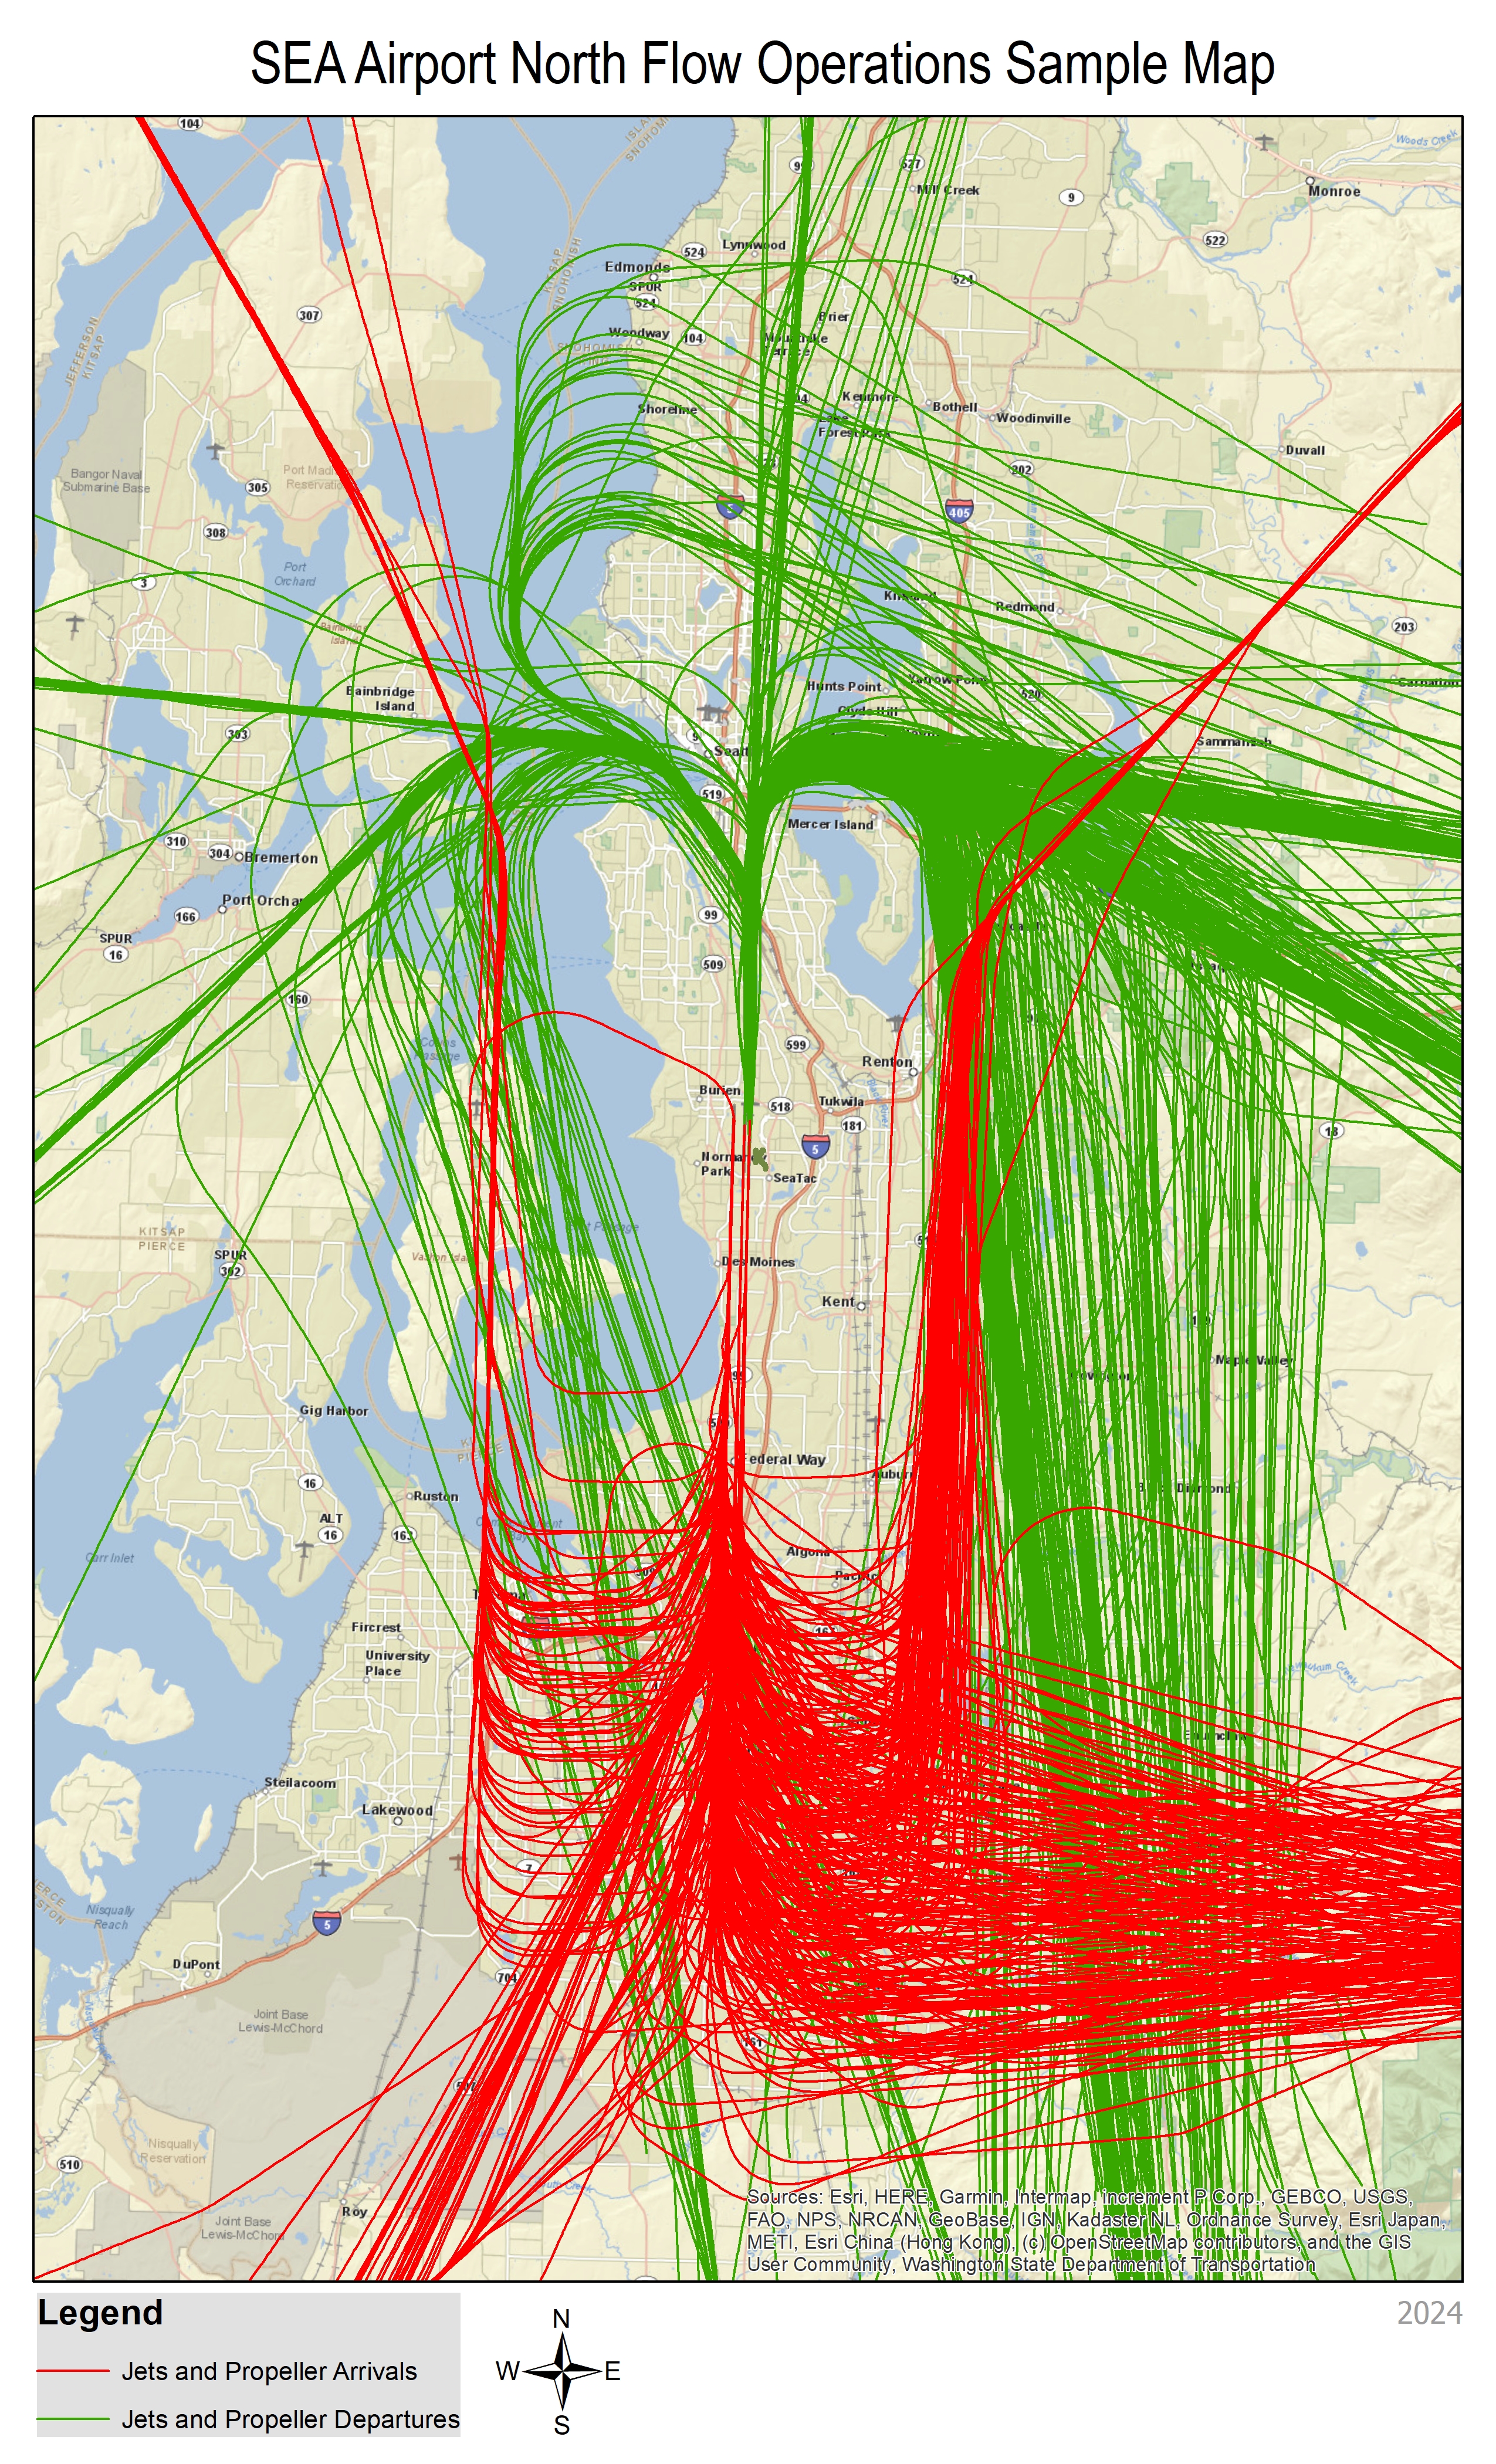 Informative map shows a sample of flight patterns over the Puget sound region